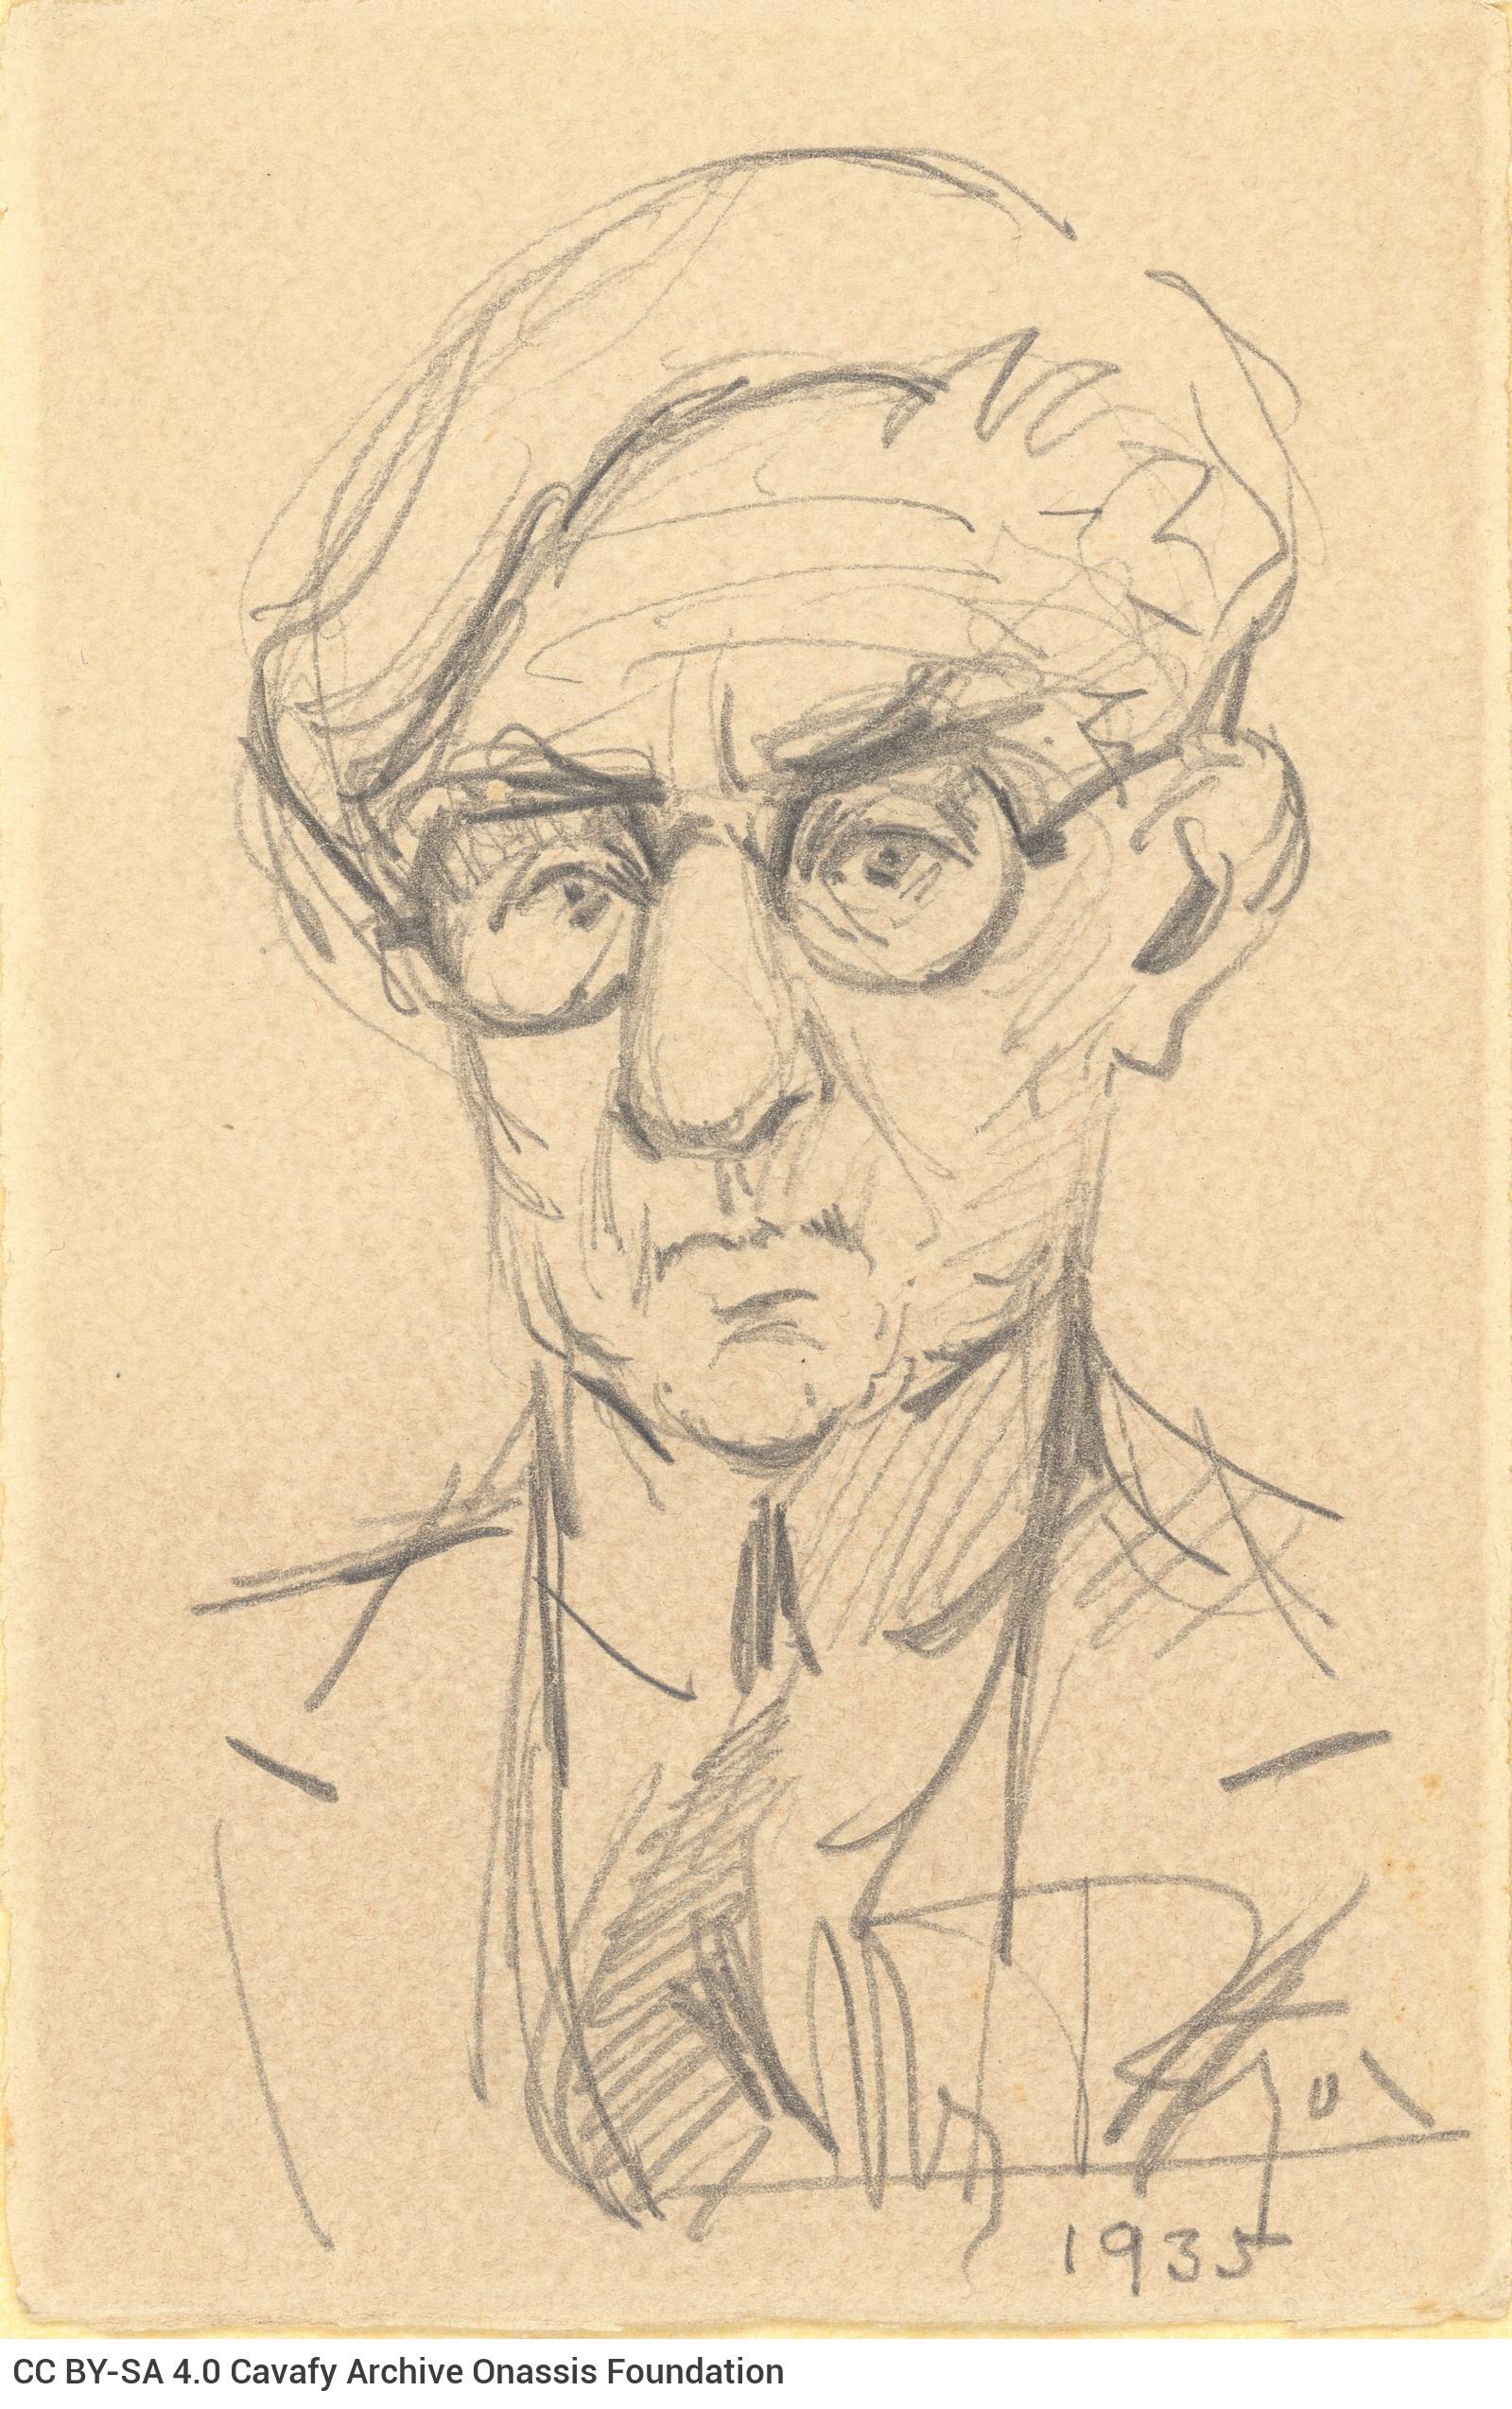 Drawing in pencil by Nikolaos Gogos. It depicts Cavafy in frontal view, wearing glasses. Signed and dated. The drawing was ma